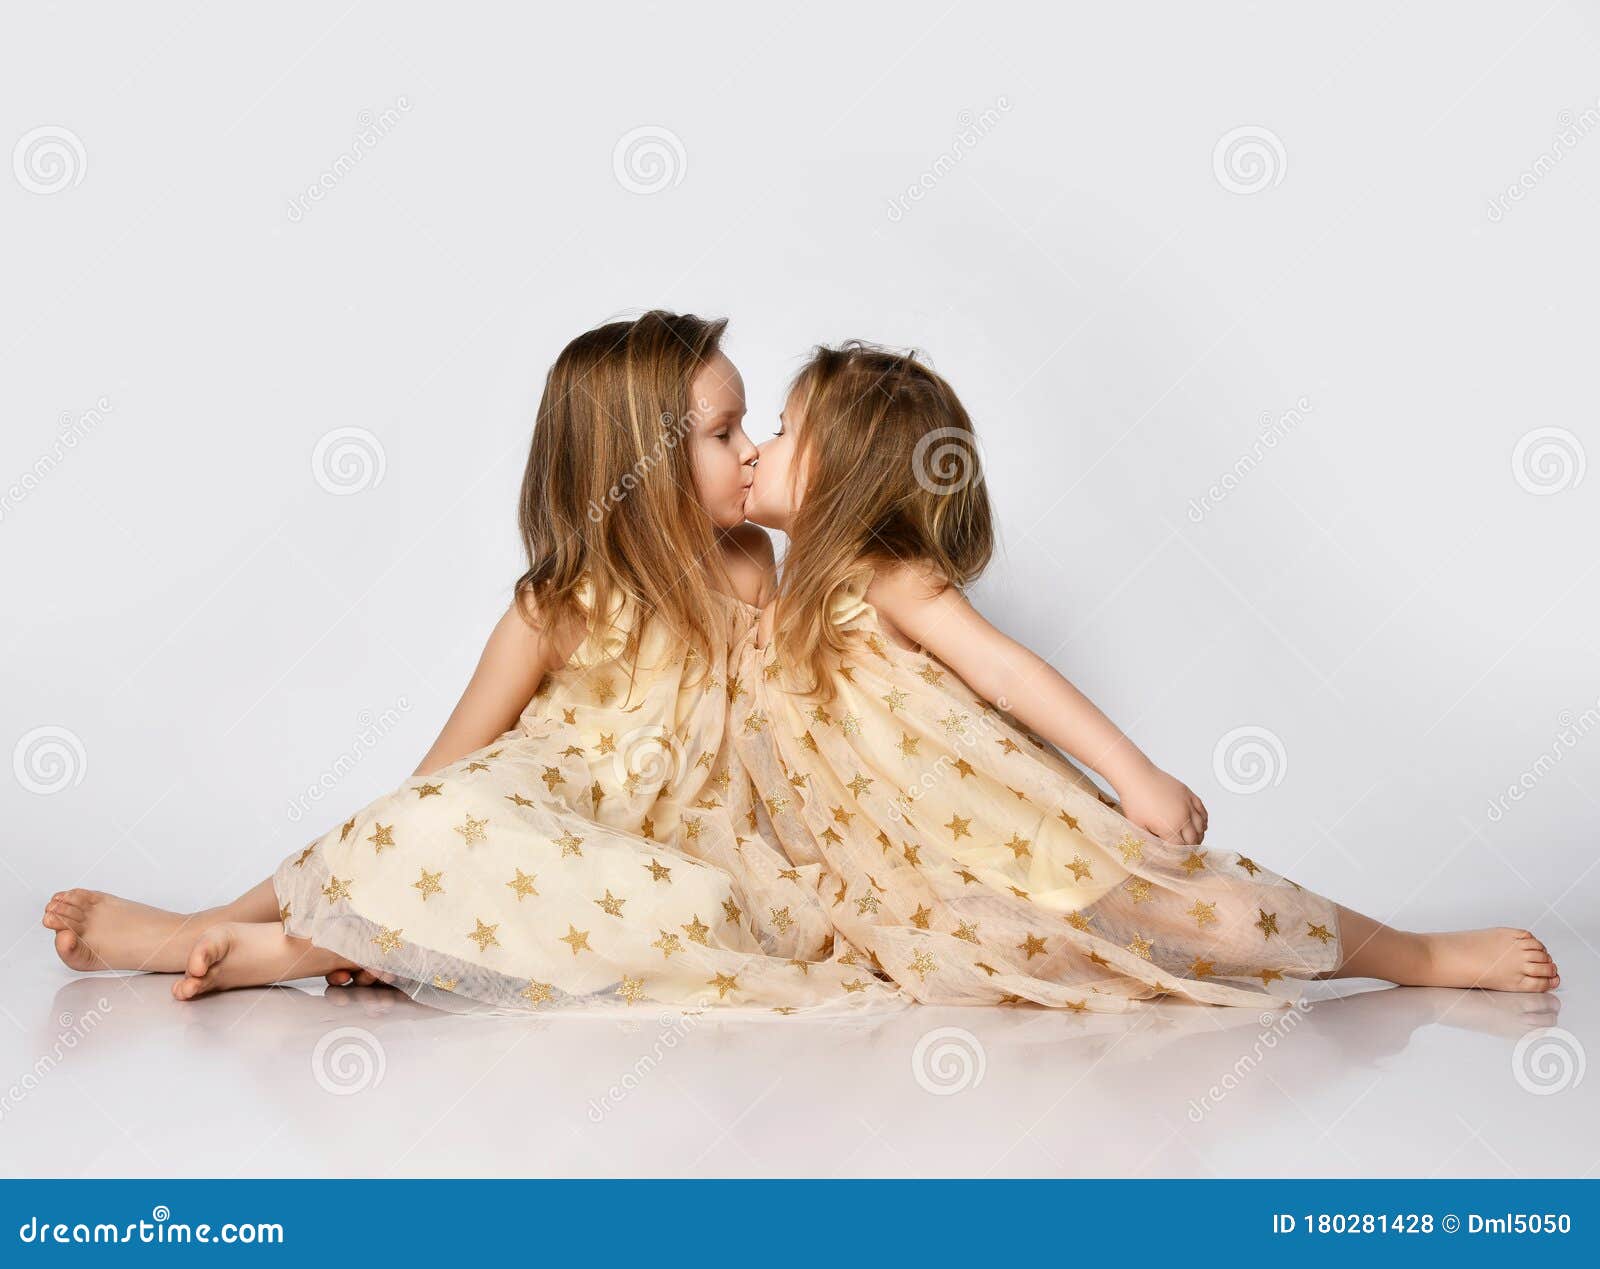 Two Small Beautiful Smiling Girls Sisters In Same Dresses With Stars Barefoot Sitting On Floor 